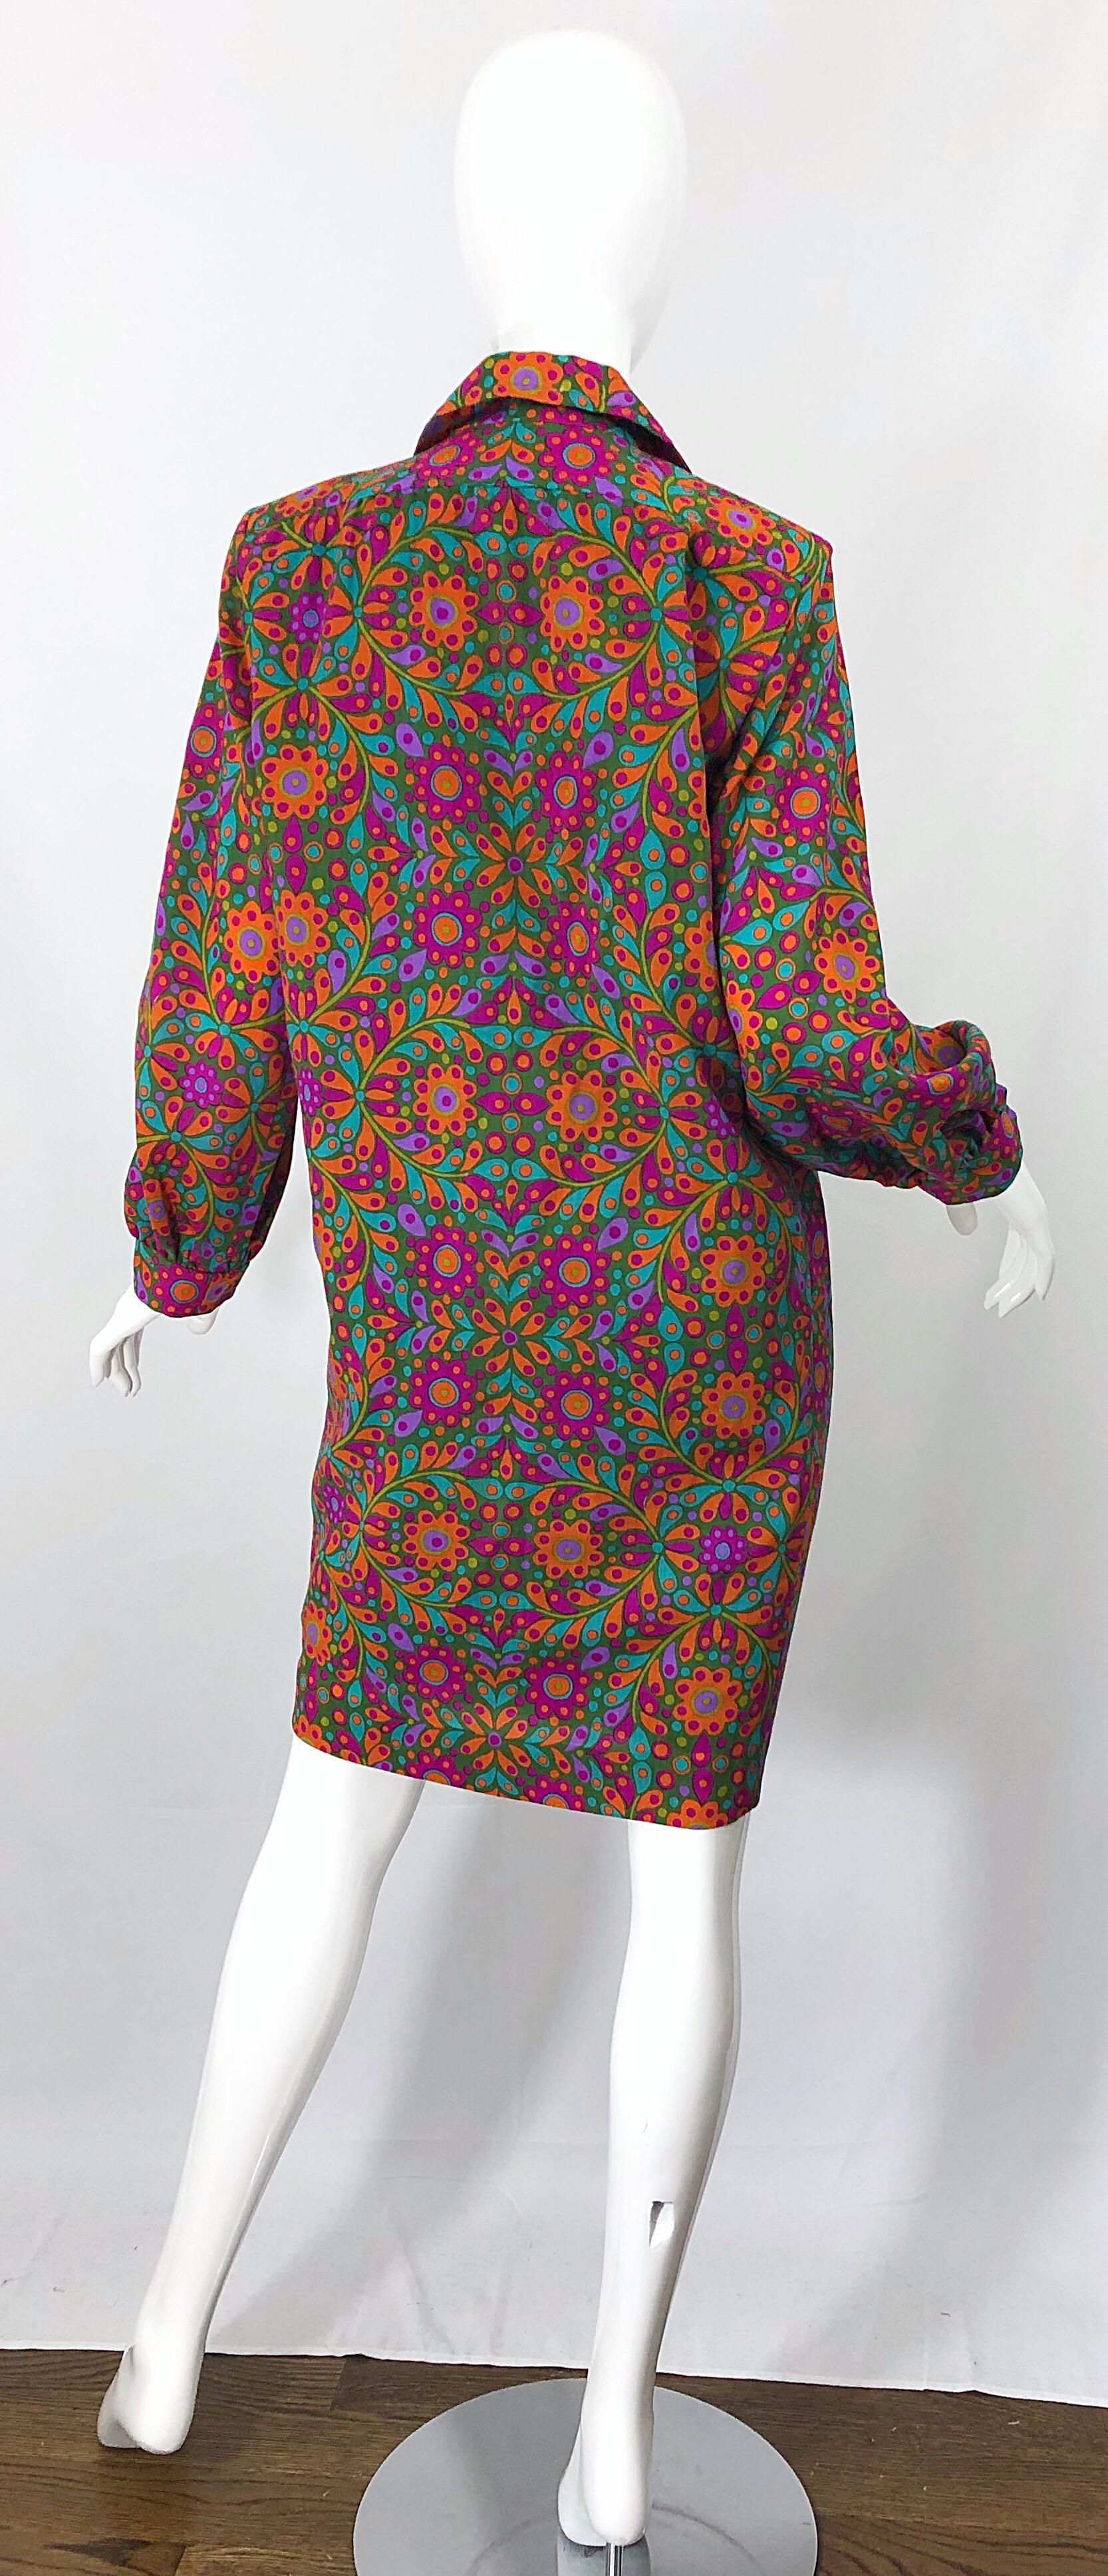 Yves Saint Laurent 1990s Wool Challis Flower Print Vintage 90s Smock Dress In Excellent Condition For Sale In San Diego, CA